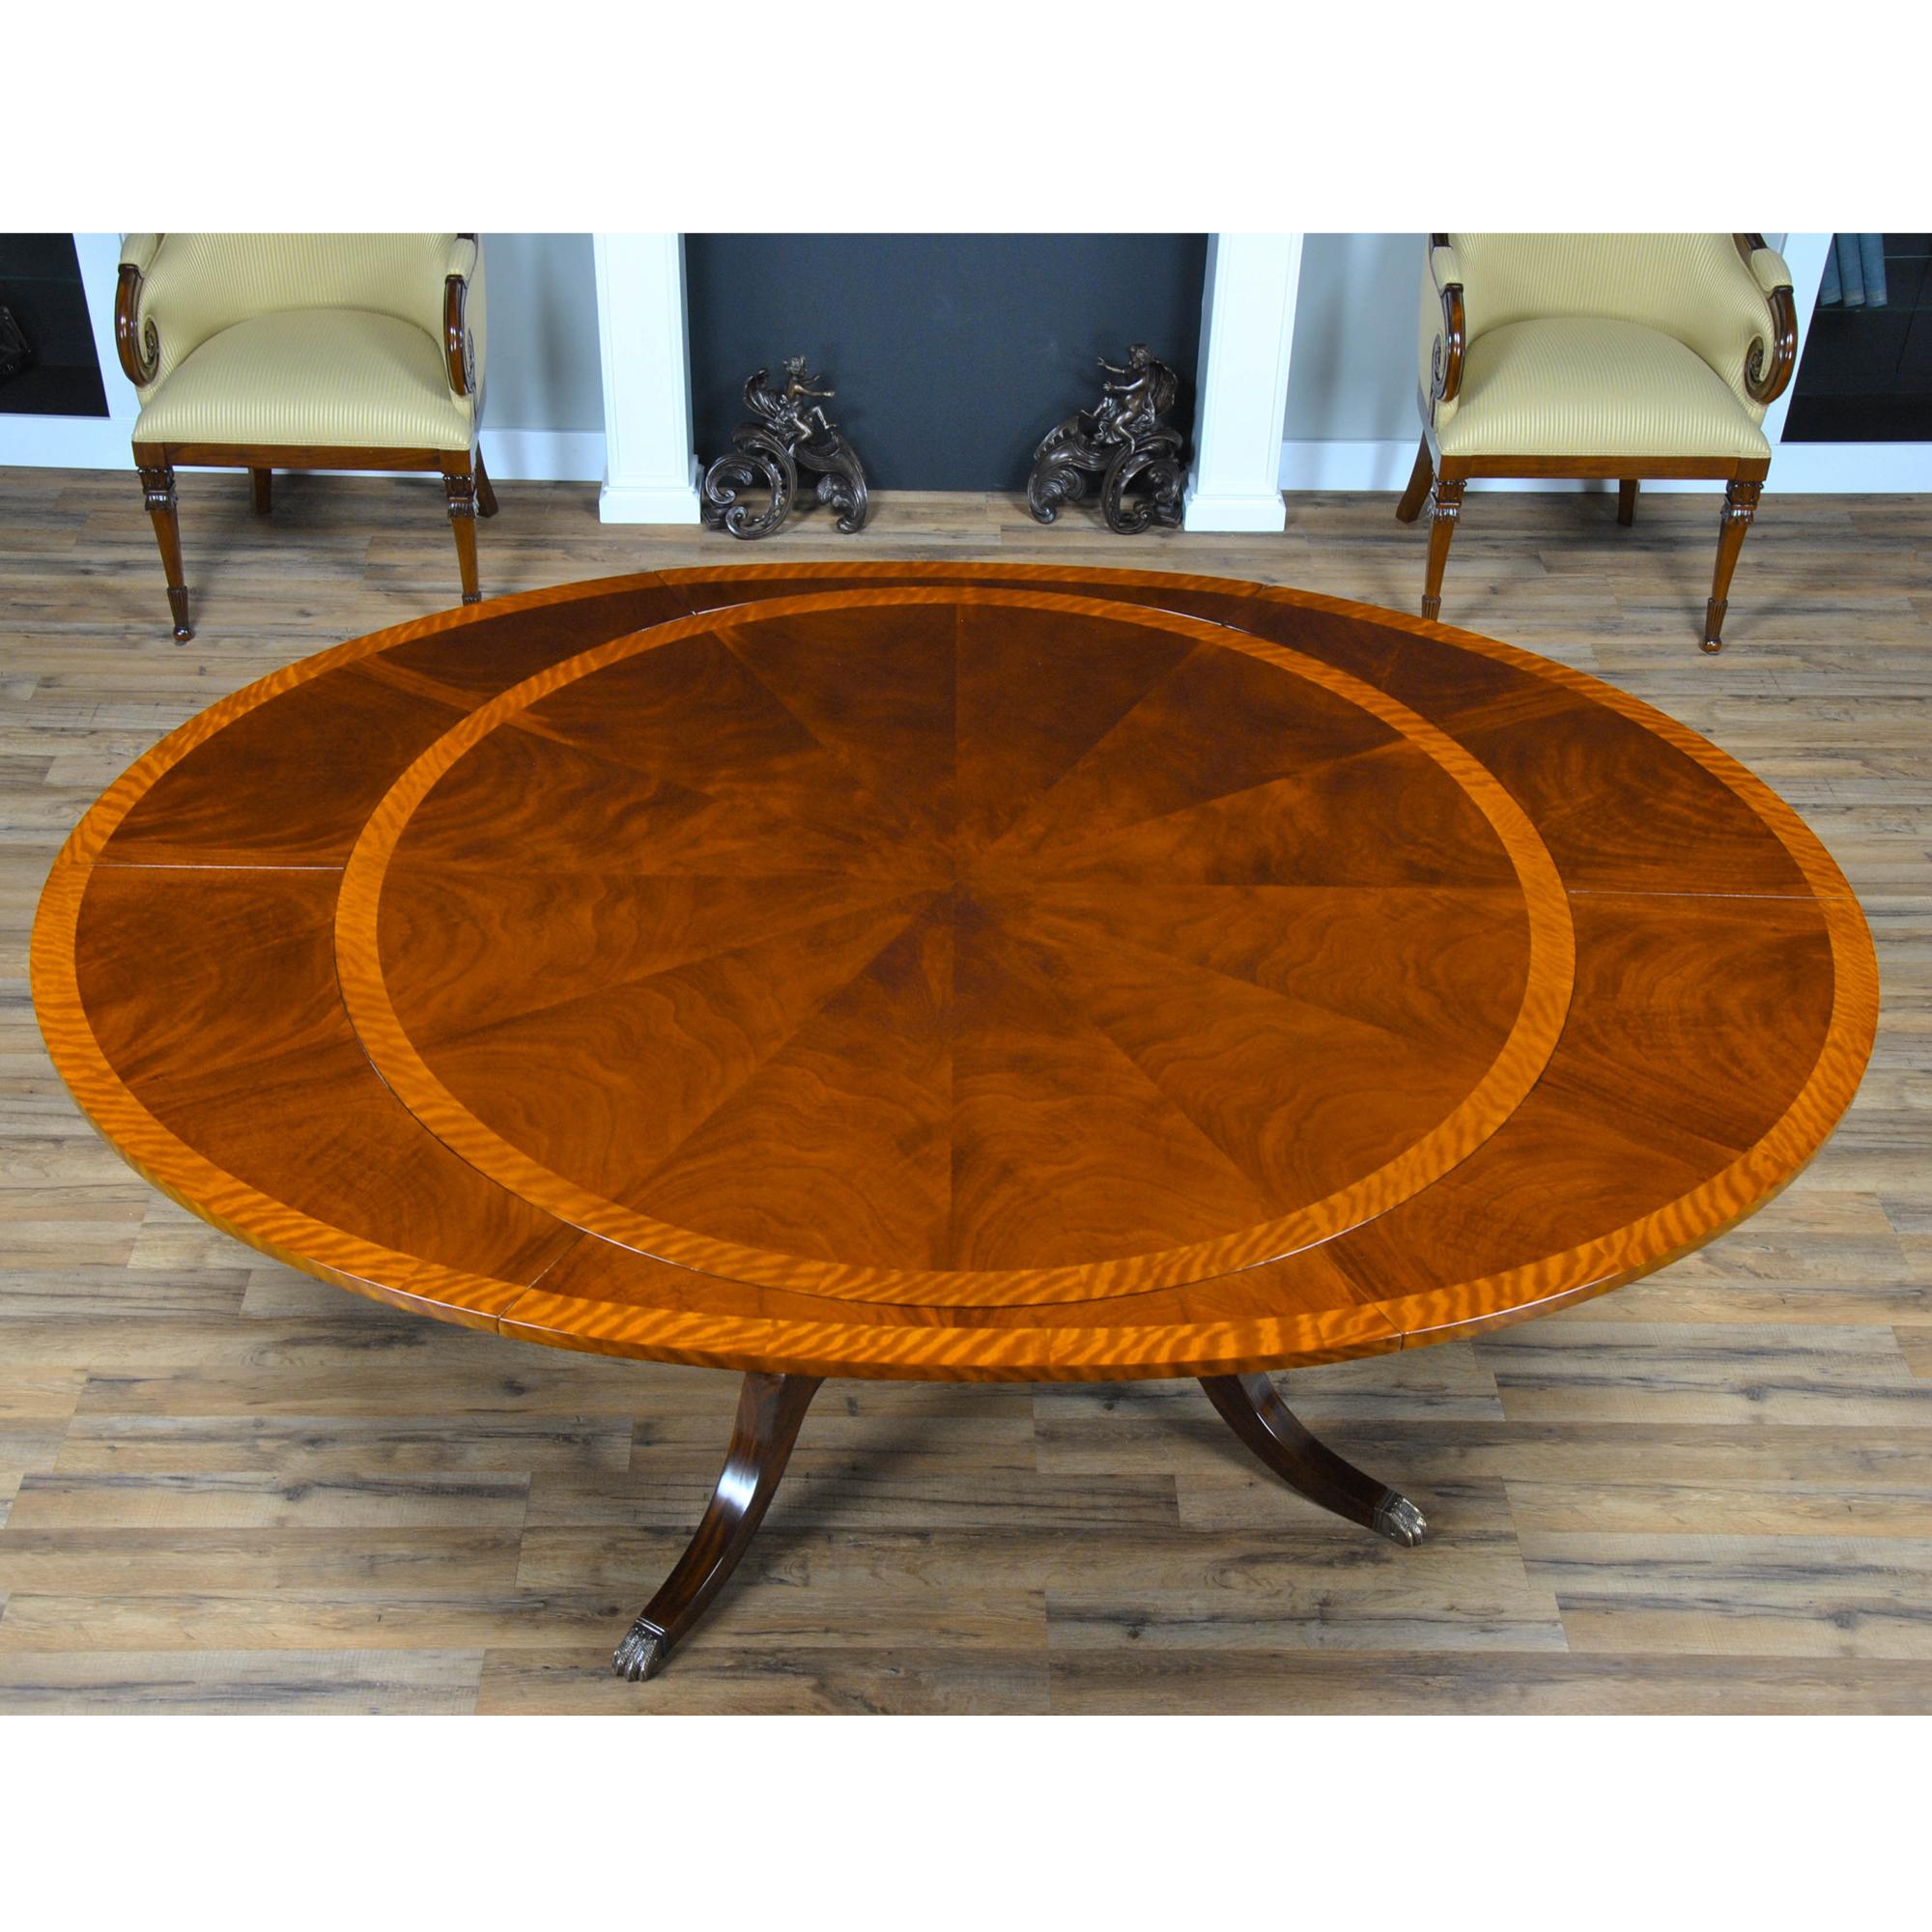 A sixty inch Round to Oval Perimeter Table is produced with a high quality figured mahogany field and satinwood banding makes for a bold and interesting contrast in the pattern on the table top. Surrounding the top of our Round to Oval Perimeter